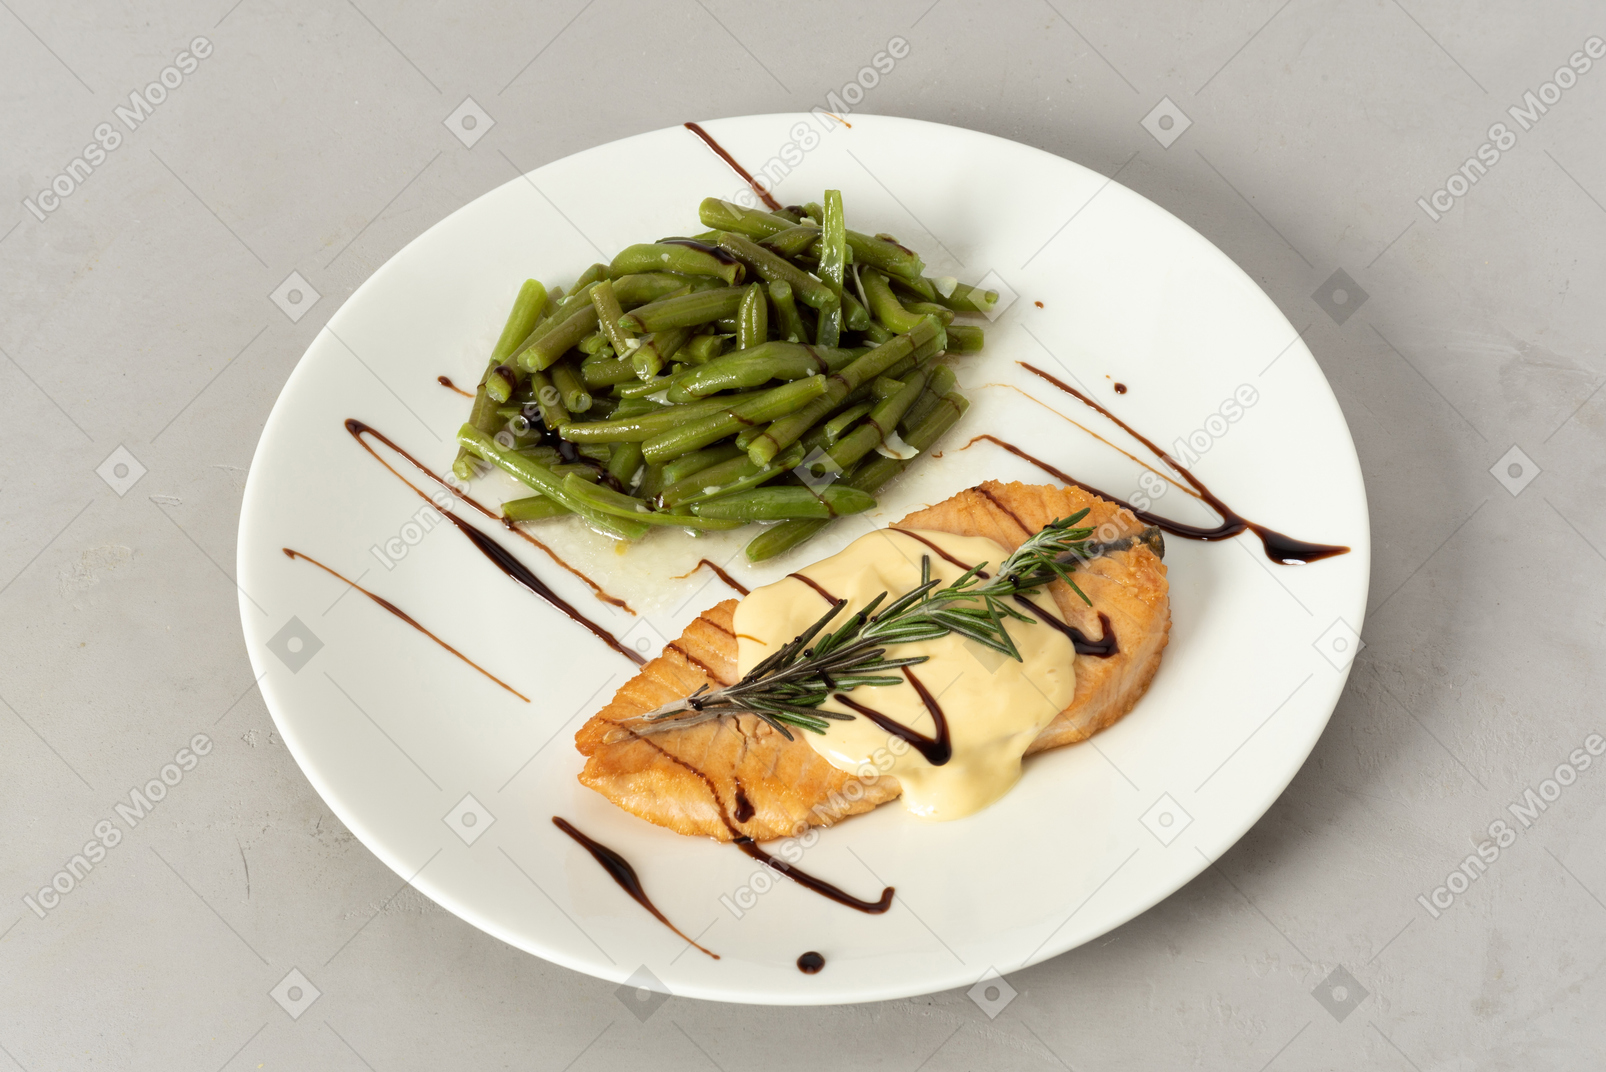 Dish of salmon with white sauce and string beans